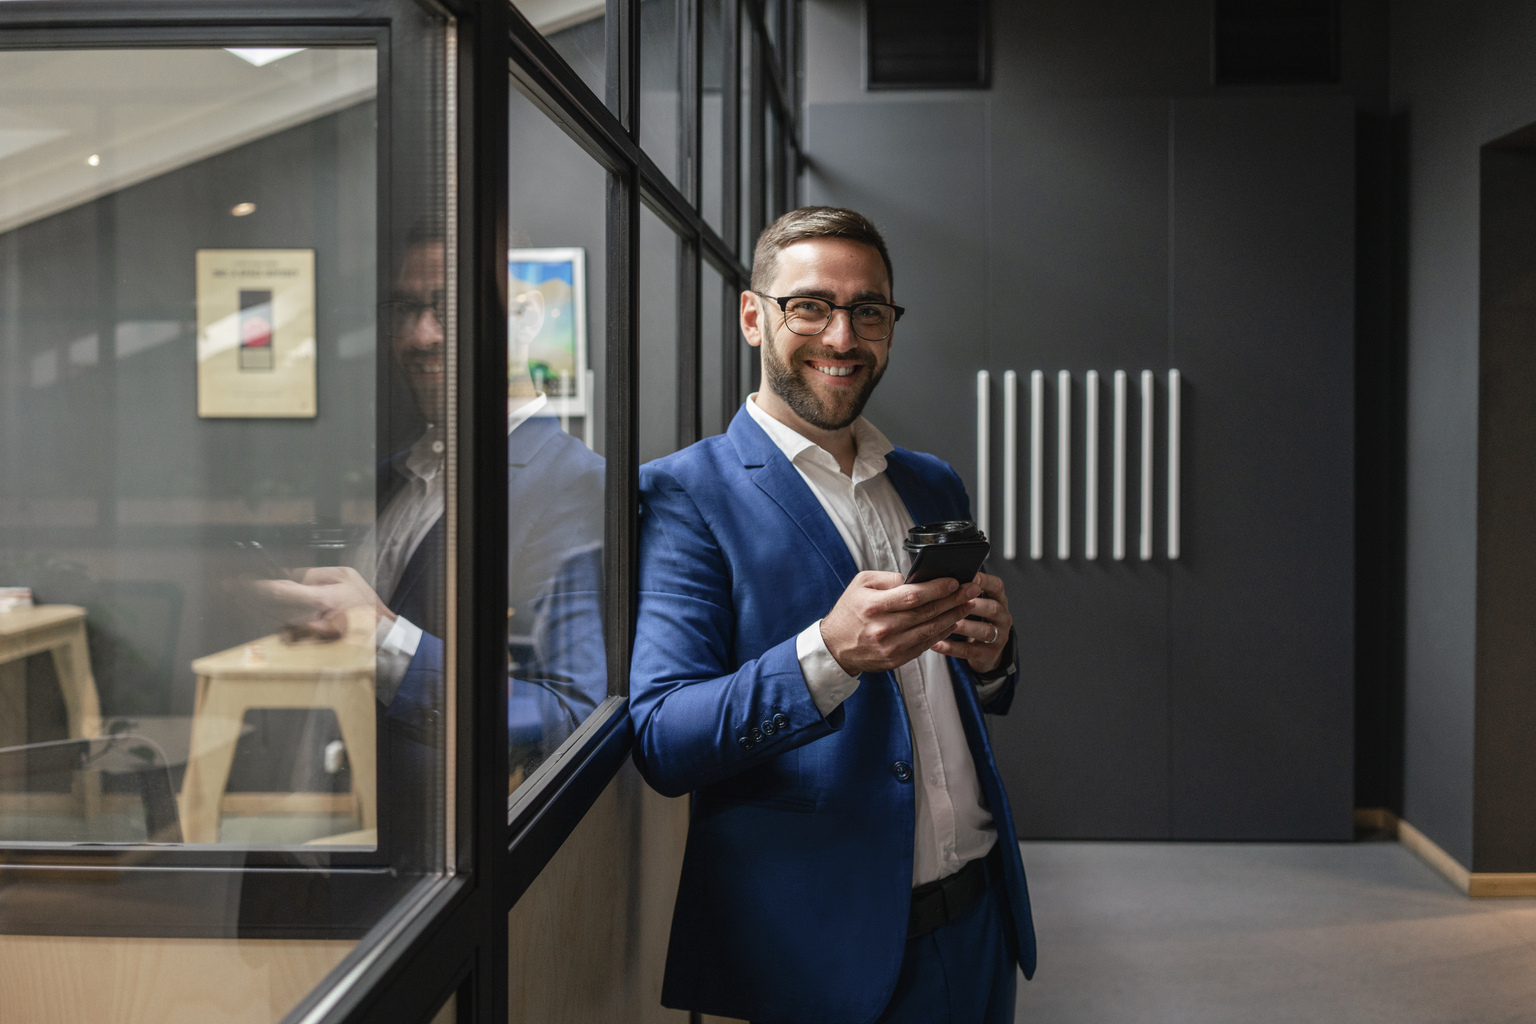 Smiling male professional holding mobile phone and coffee cup while standing by glass wall in office corridor